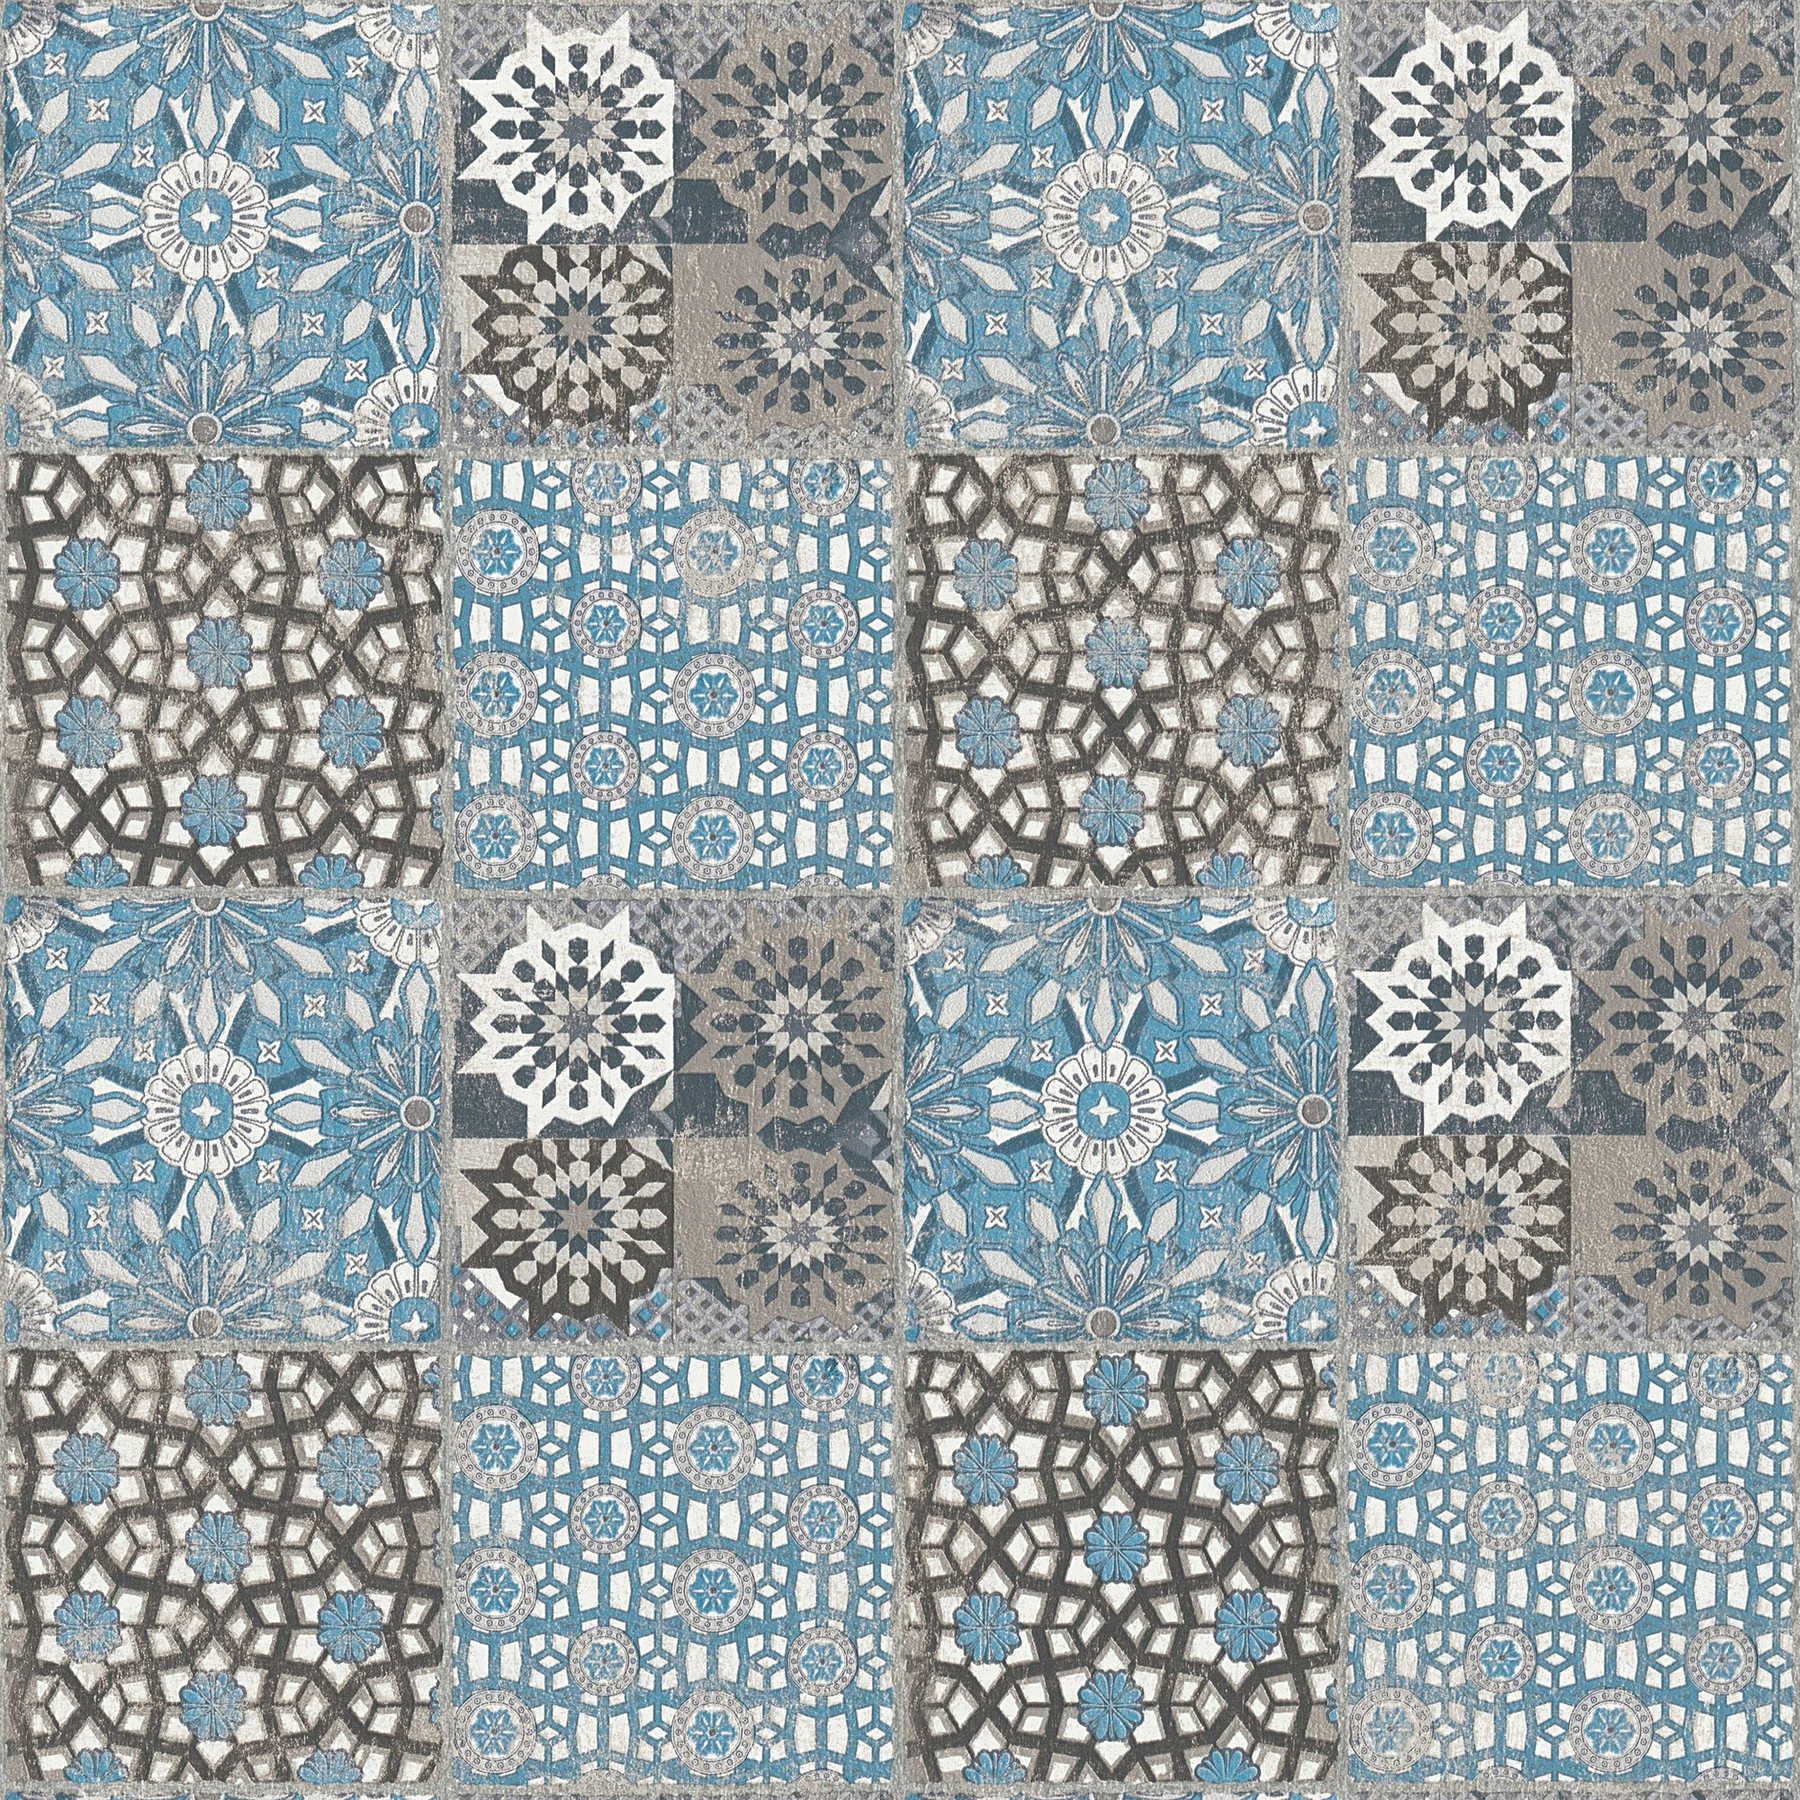         Tile wallpaper with retro pattern & used look - blue, grey
    